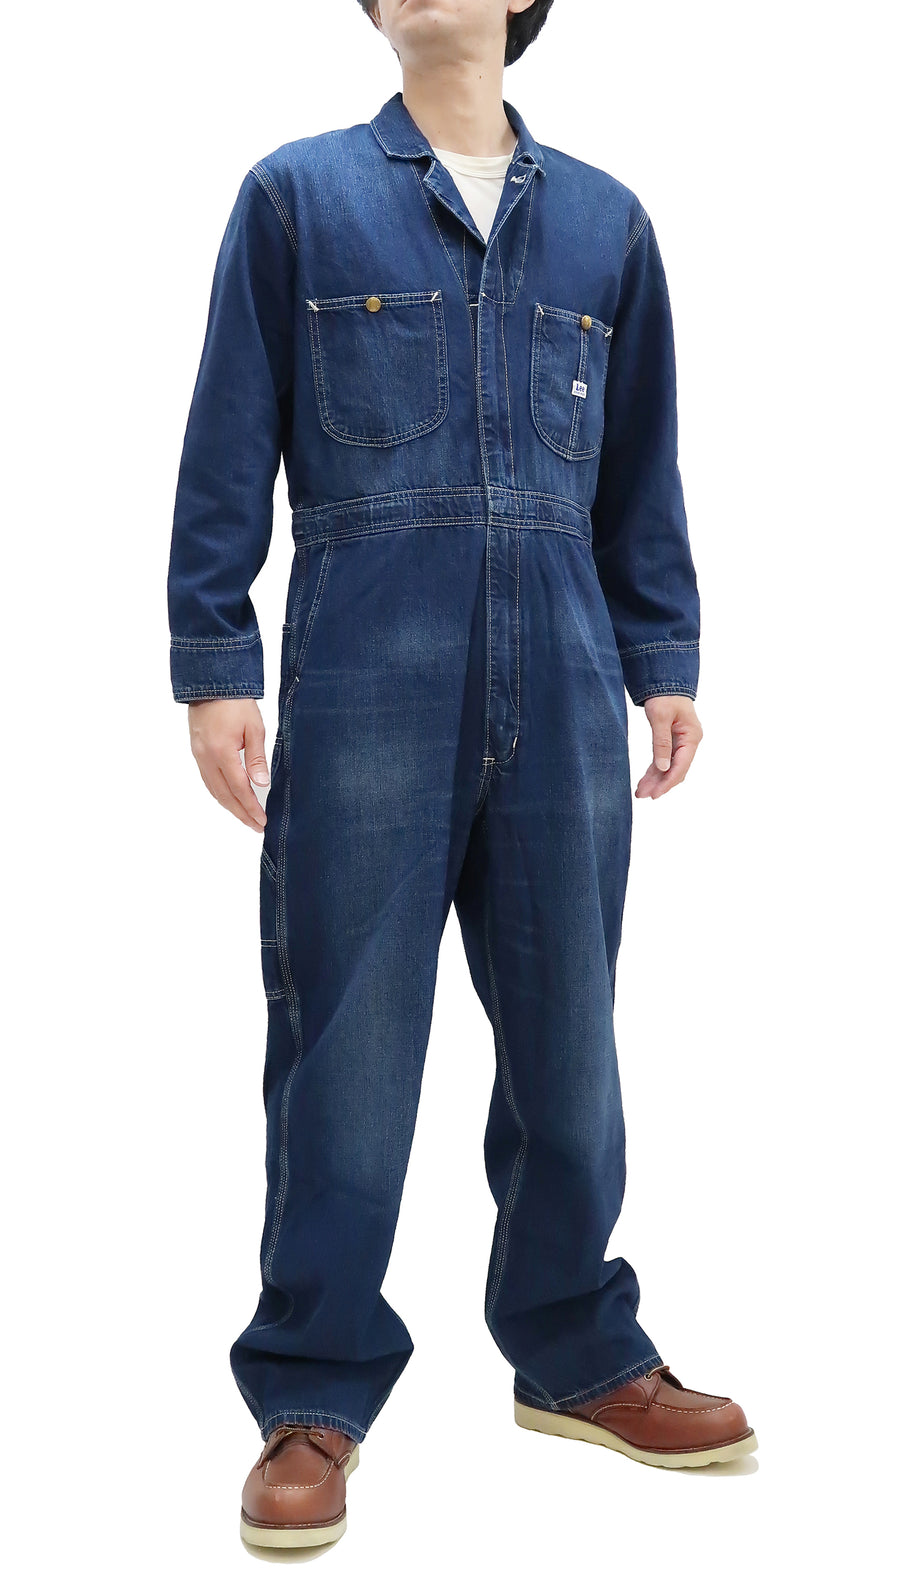 Lee Coverall Men's Reproduction of Union-All Long Sleeve Unlined Coveralls LM7213 LM7213-136 Fade-Denim